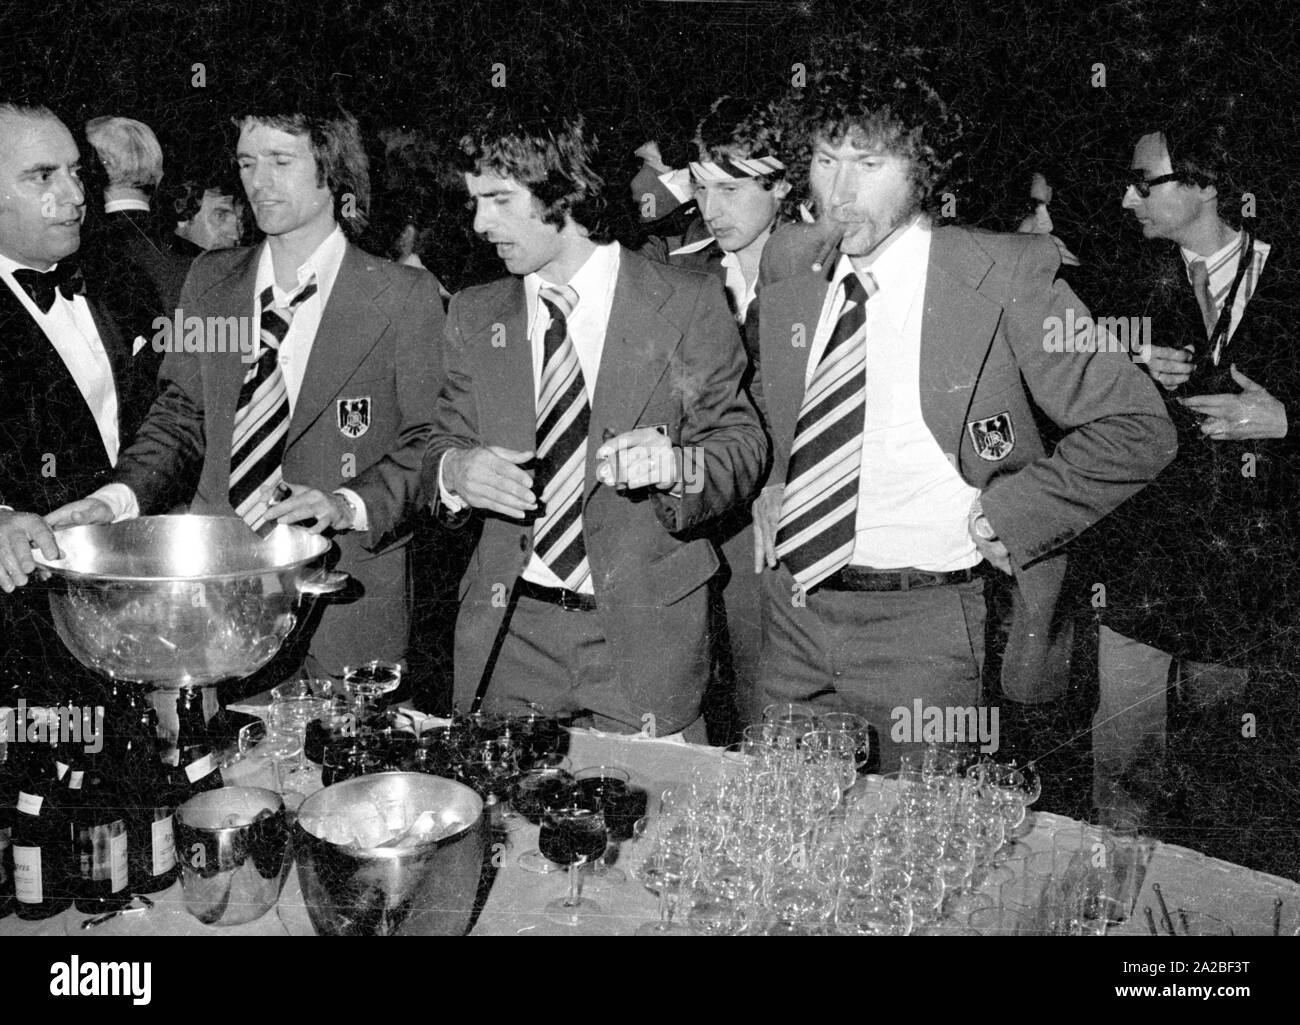 From left to right: Wolfgang Overath, Gerd Müller and Paul Breitner at the banquet of the Federal President at Hotel Hilton in Munich. Stock Photo